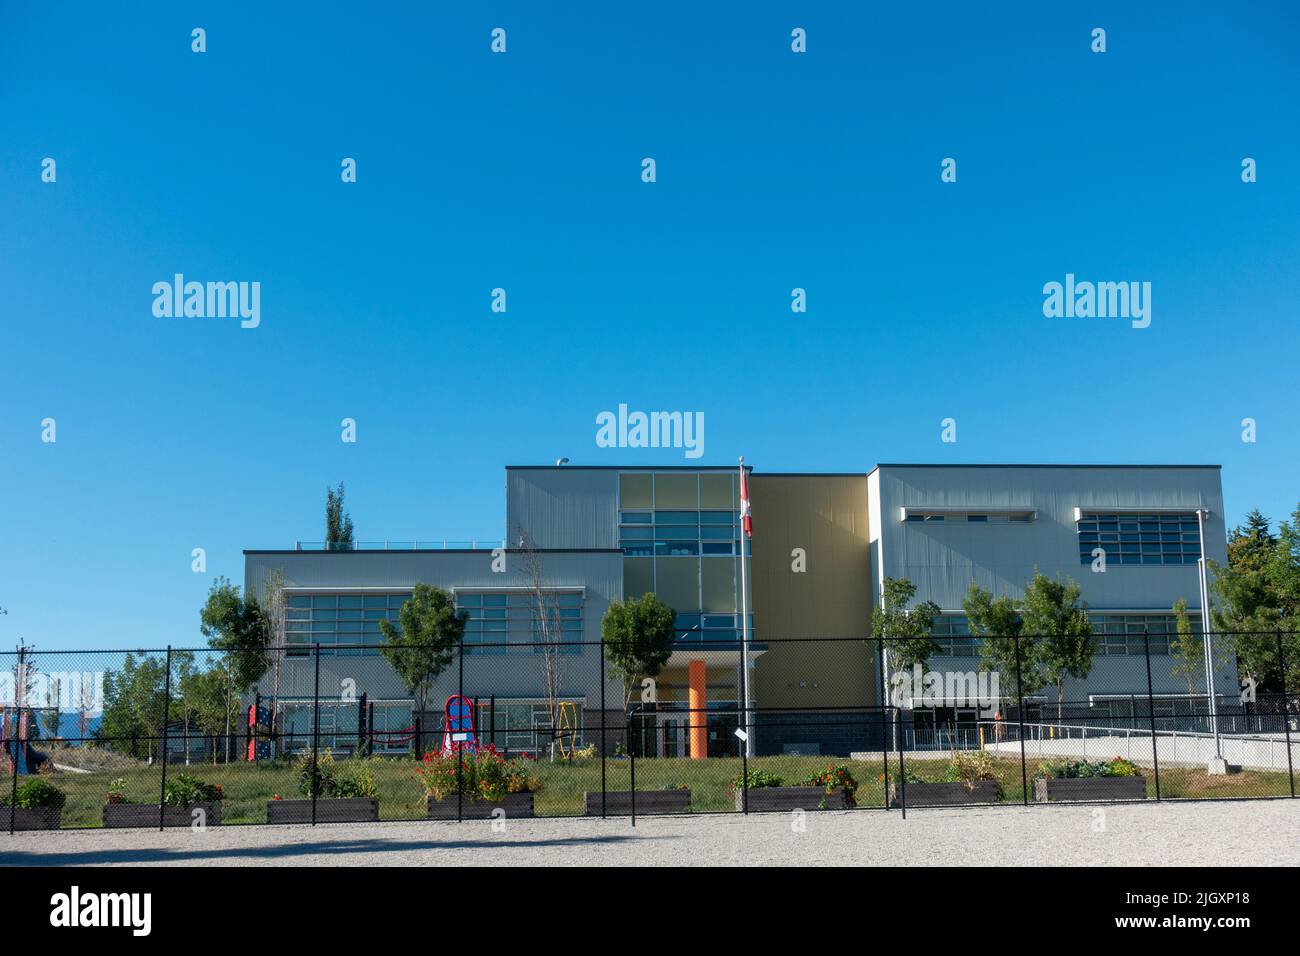 Elementary school building exterior in Vancouver, BC Canada Stock Photo